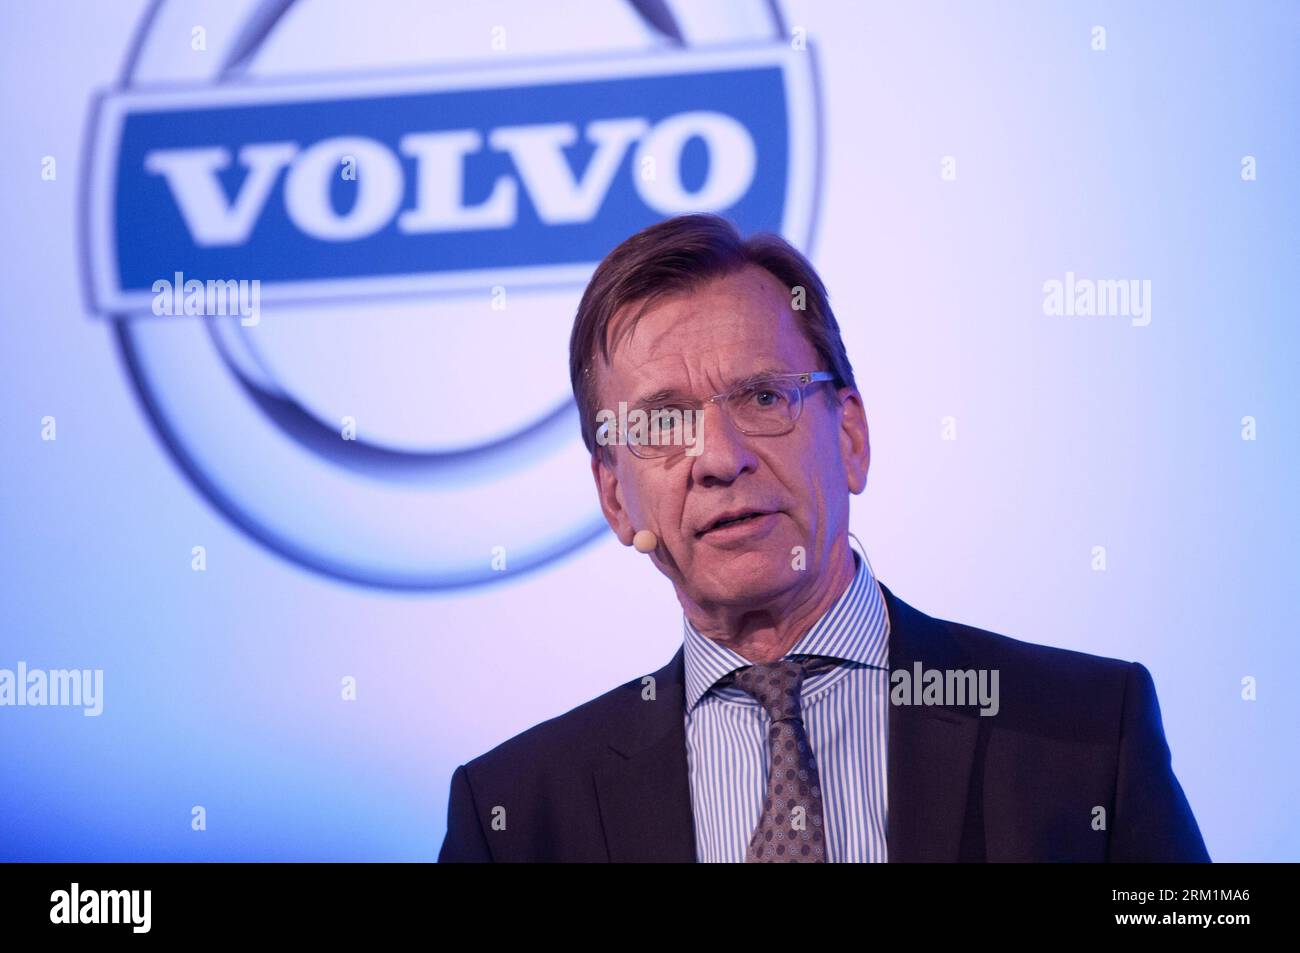 Bildnummer: 59598728  Datum: 03.05.2013  Copyright: imago/Xinhua (130503) -- STOCKHOLM, May 3, 2013 (Xinhua) -- Hakan Samuelsson, the President and CEO of Volvo Car Group, addresses a news conference in Stockholm, capital of Sweden, on May 3, 2013. The profit of Volvo Car Group slumped by 99.1 percent in 2012, being strongly affected by the economic situation in Europe, said the company in a statement on Friday. (Xinhua/Liu Yinan) (lr) SWEDEN-STOCKHOLM-CARS PROFITS-2012-SLUMPING PUBLICATIONxNOTxINxCHN People Wirtschaft PK Pressetermin Porträt xdp x0x 2013 quer premiumd      59598728 Date 03 05 Stock Photo